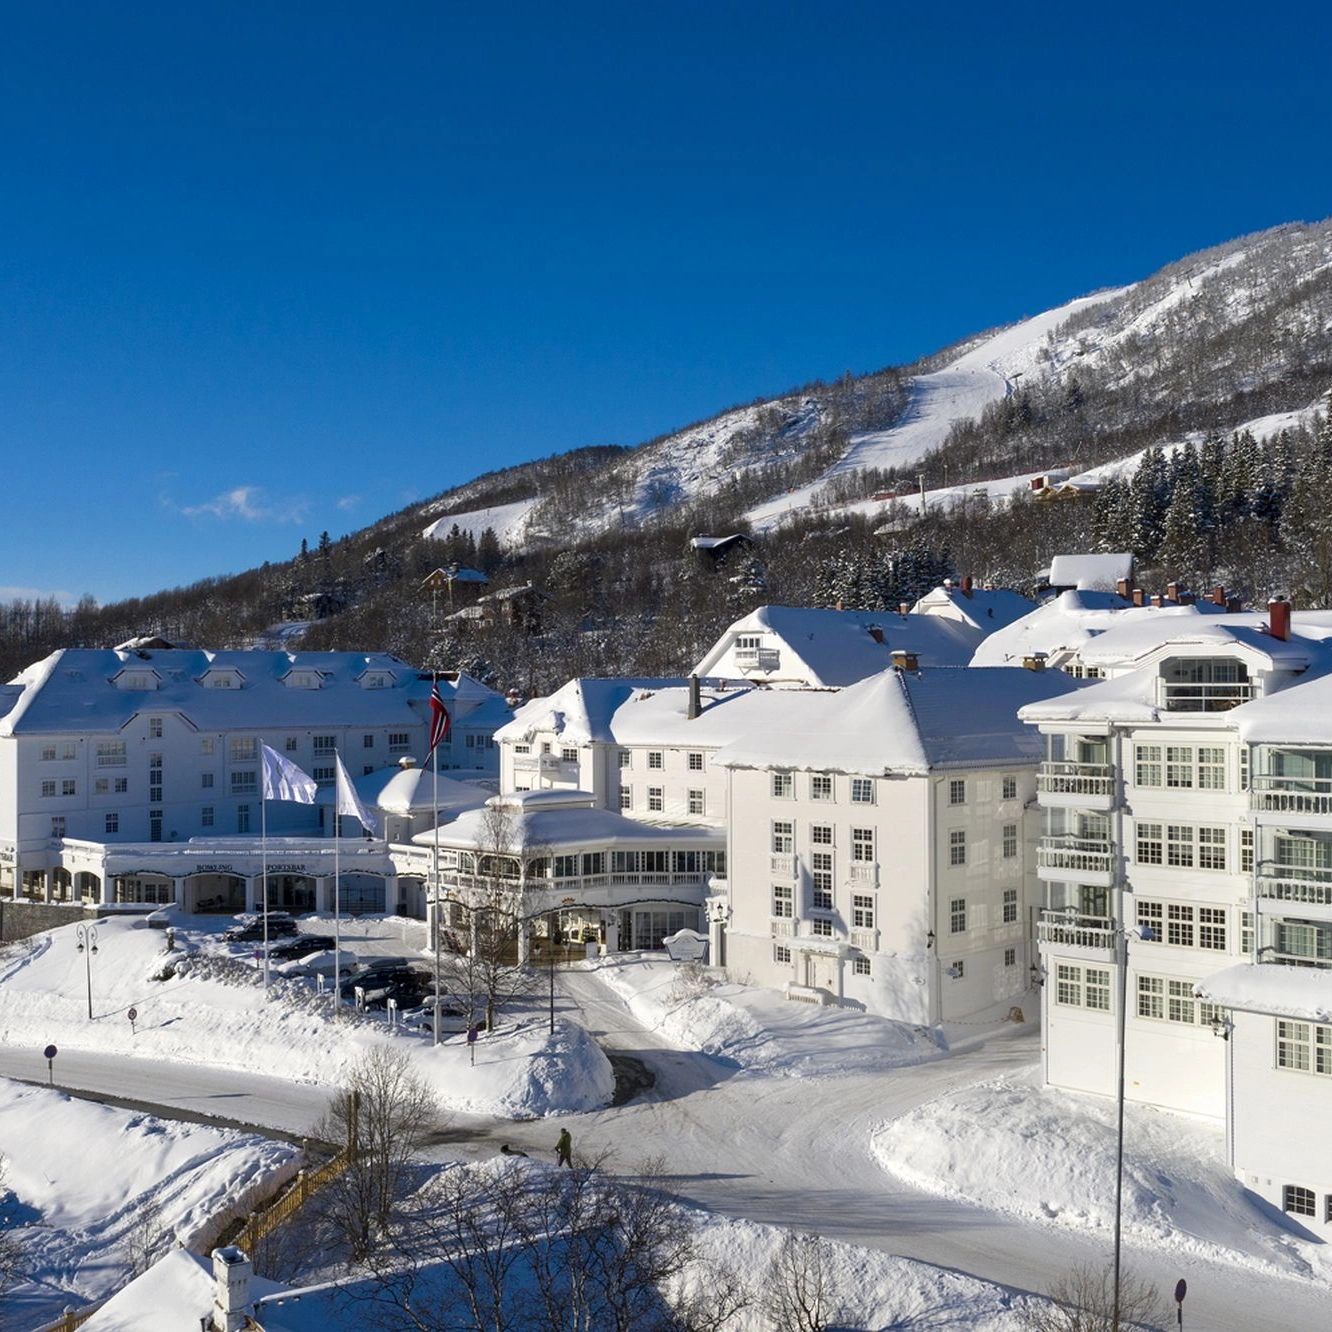 Winter at Dr. Holms Hotel - Geilo, Norway